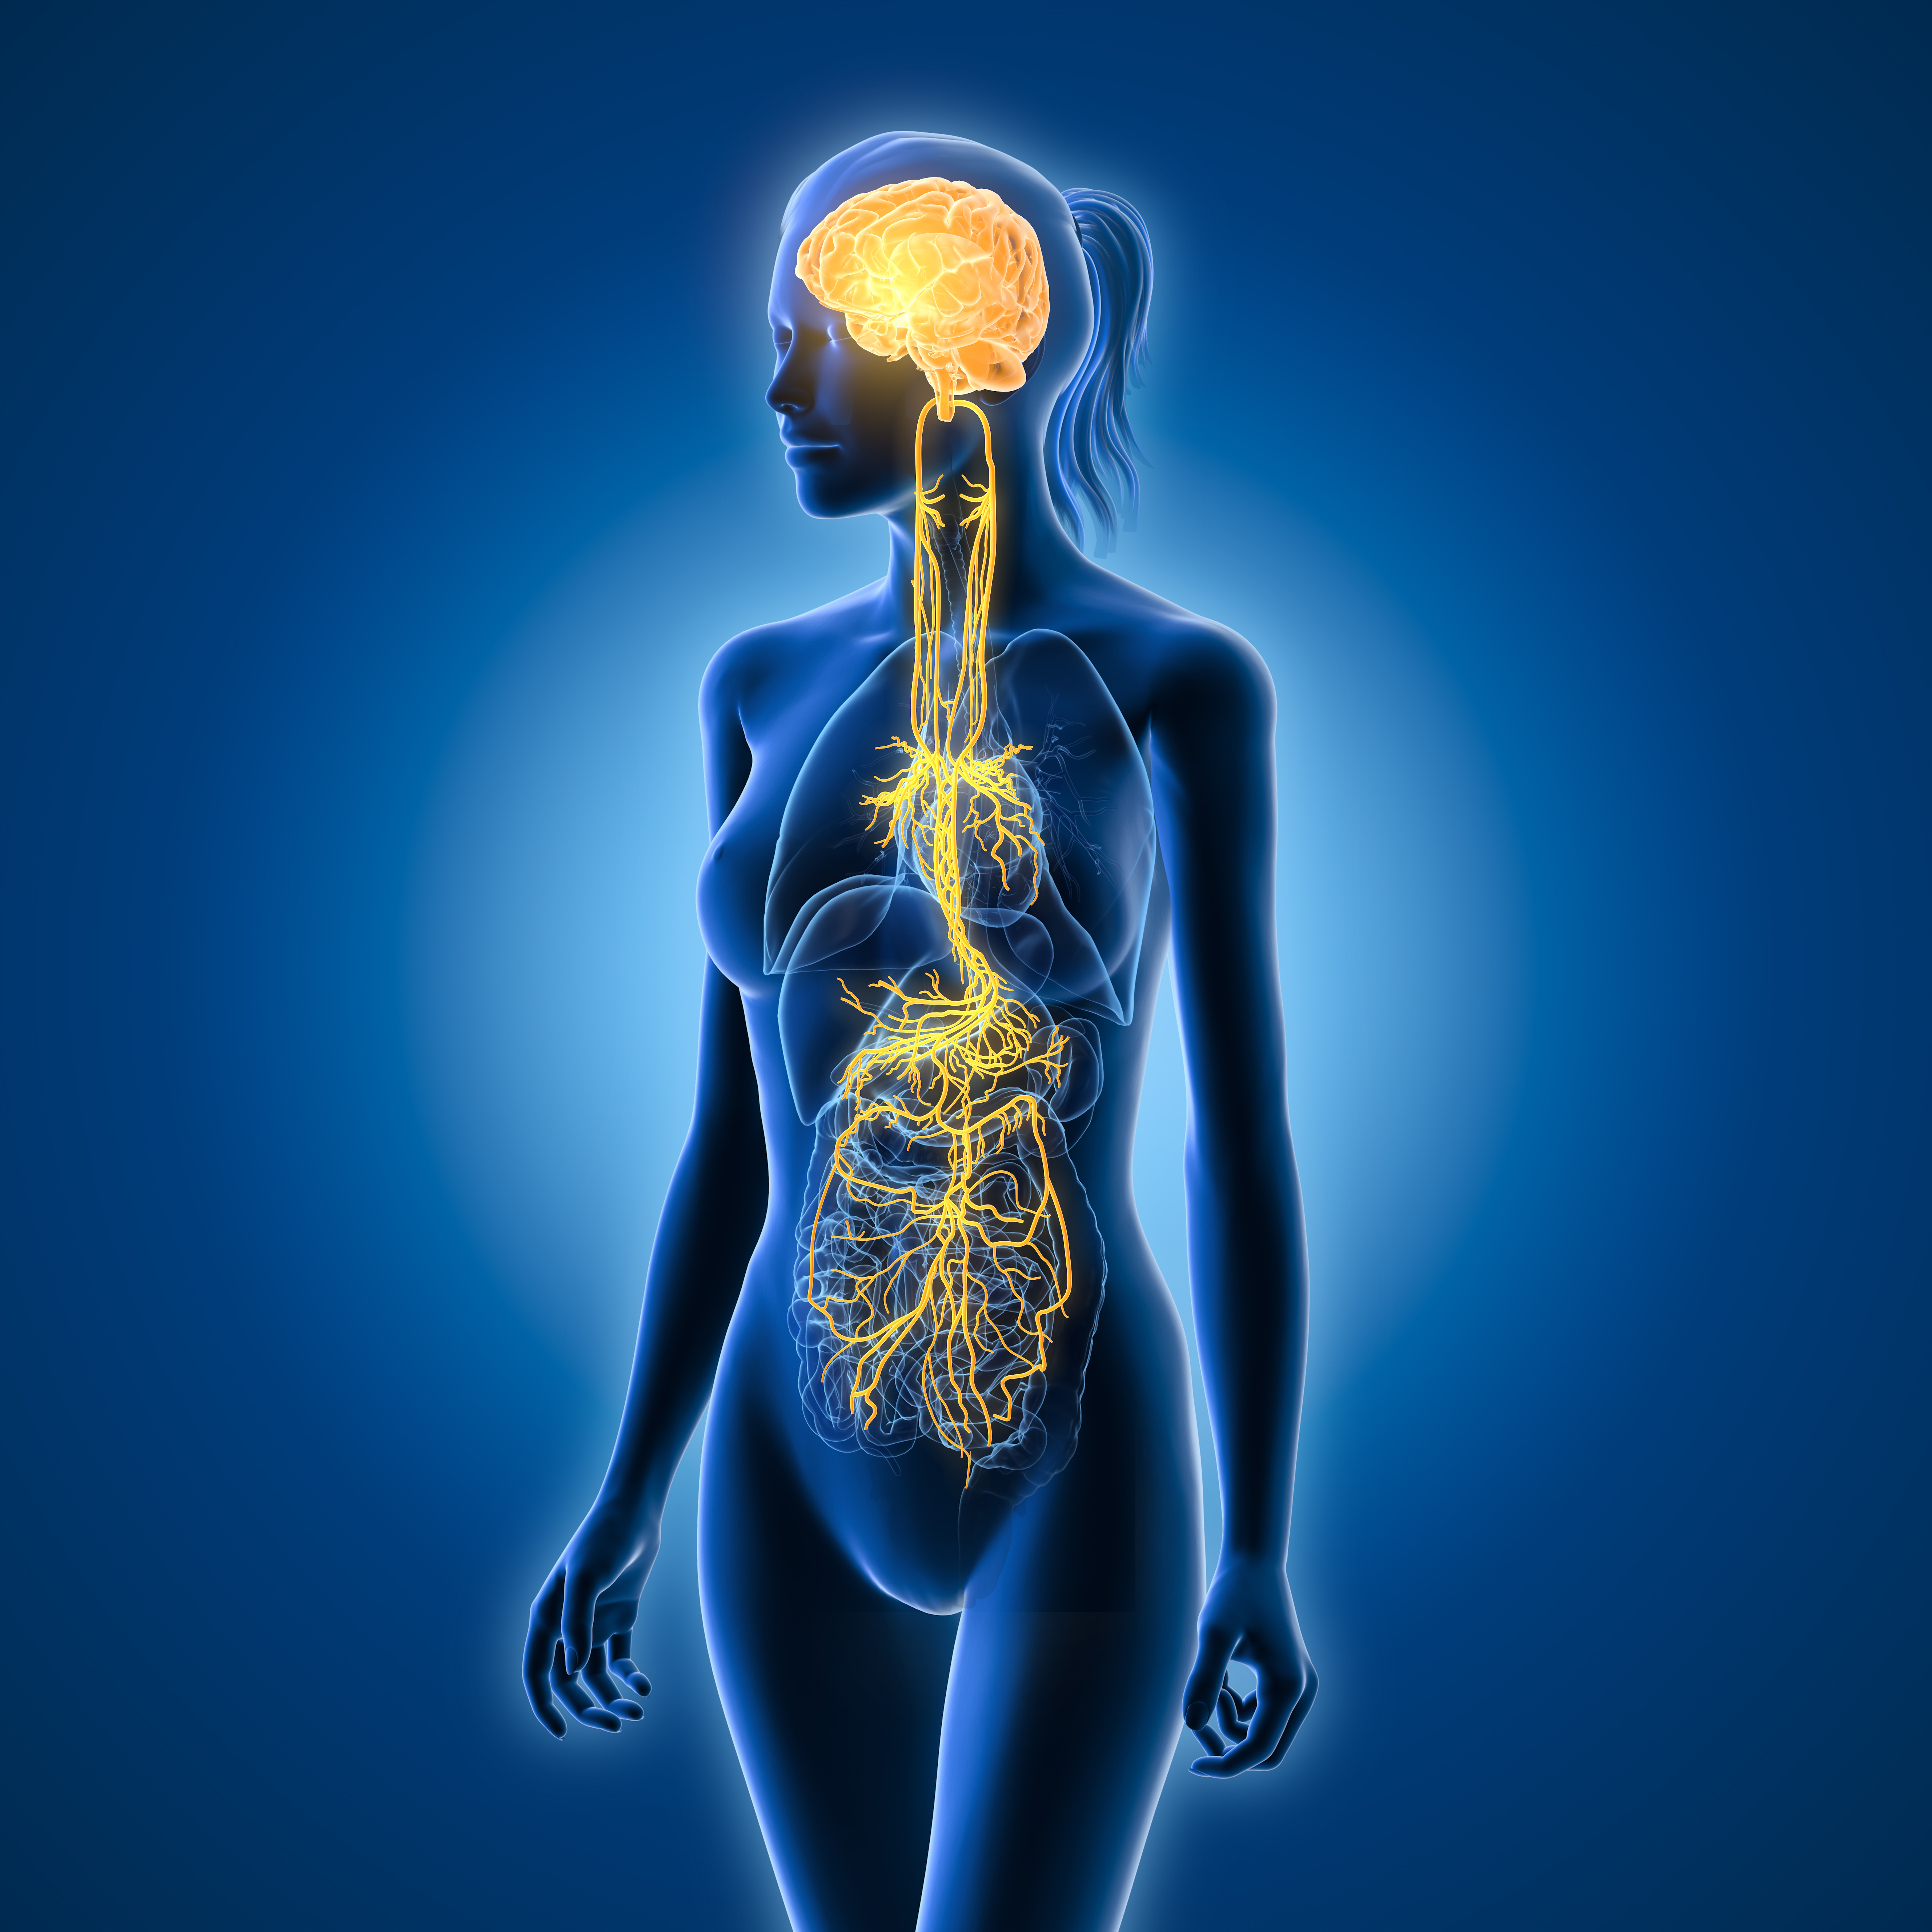 Rendering of body showing nervous system